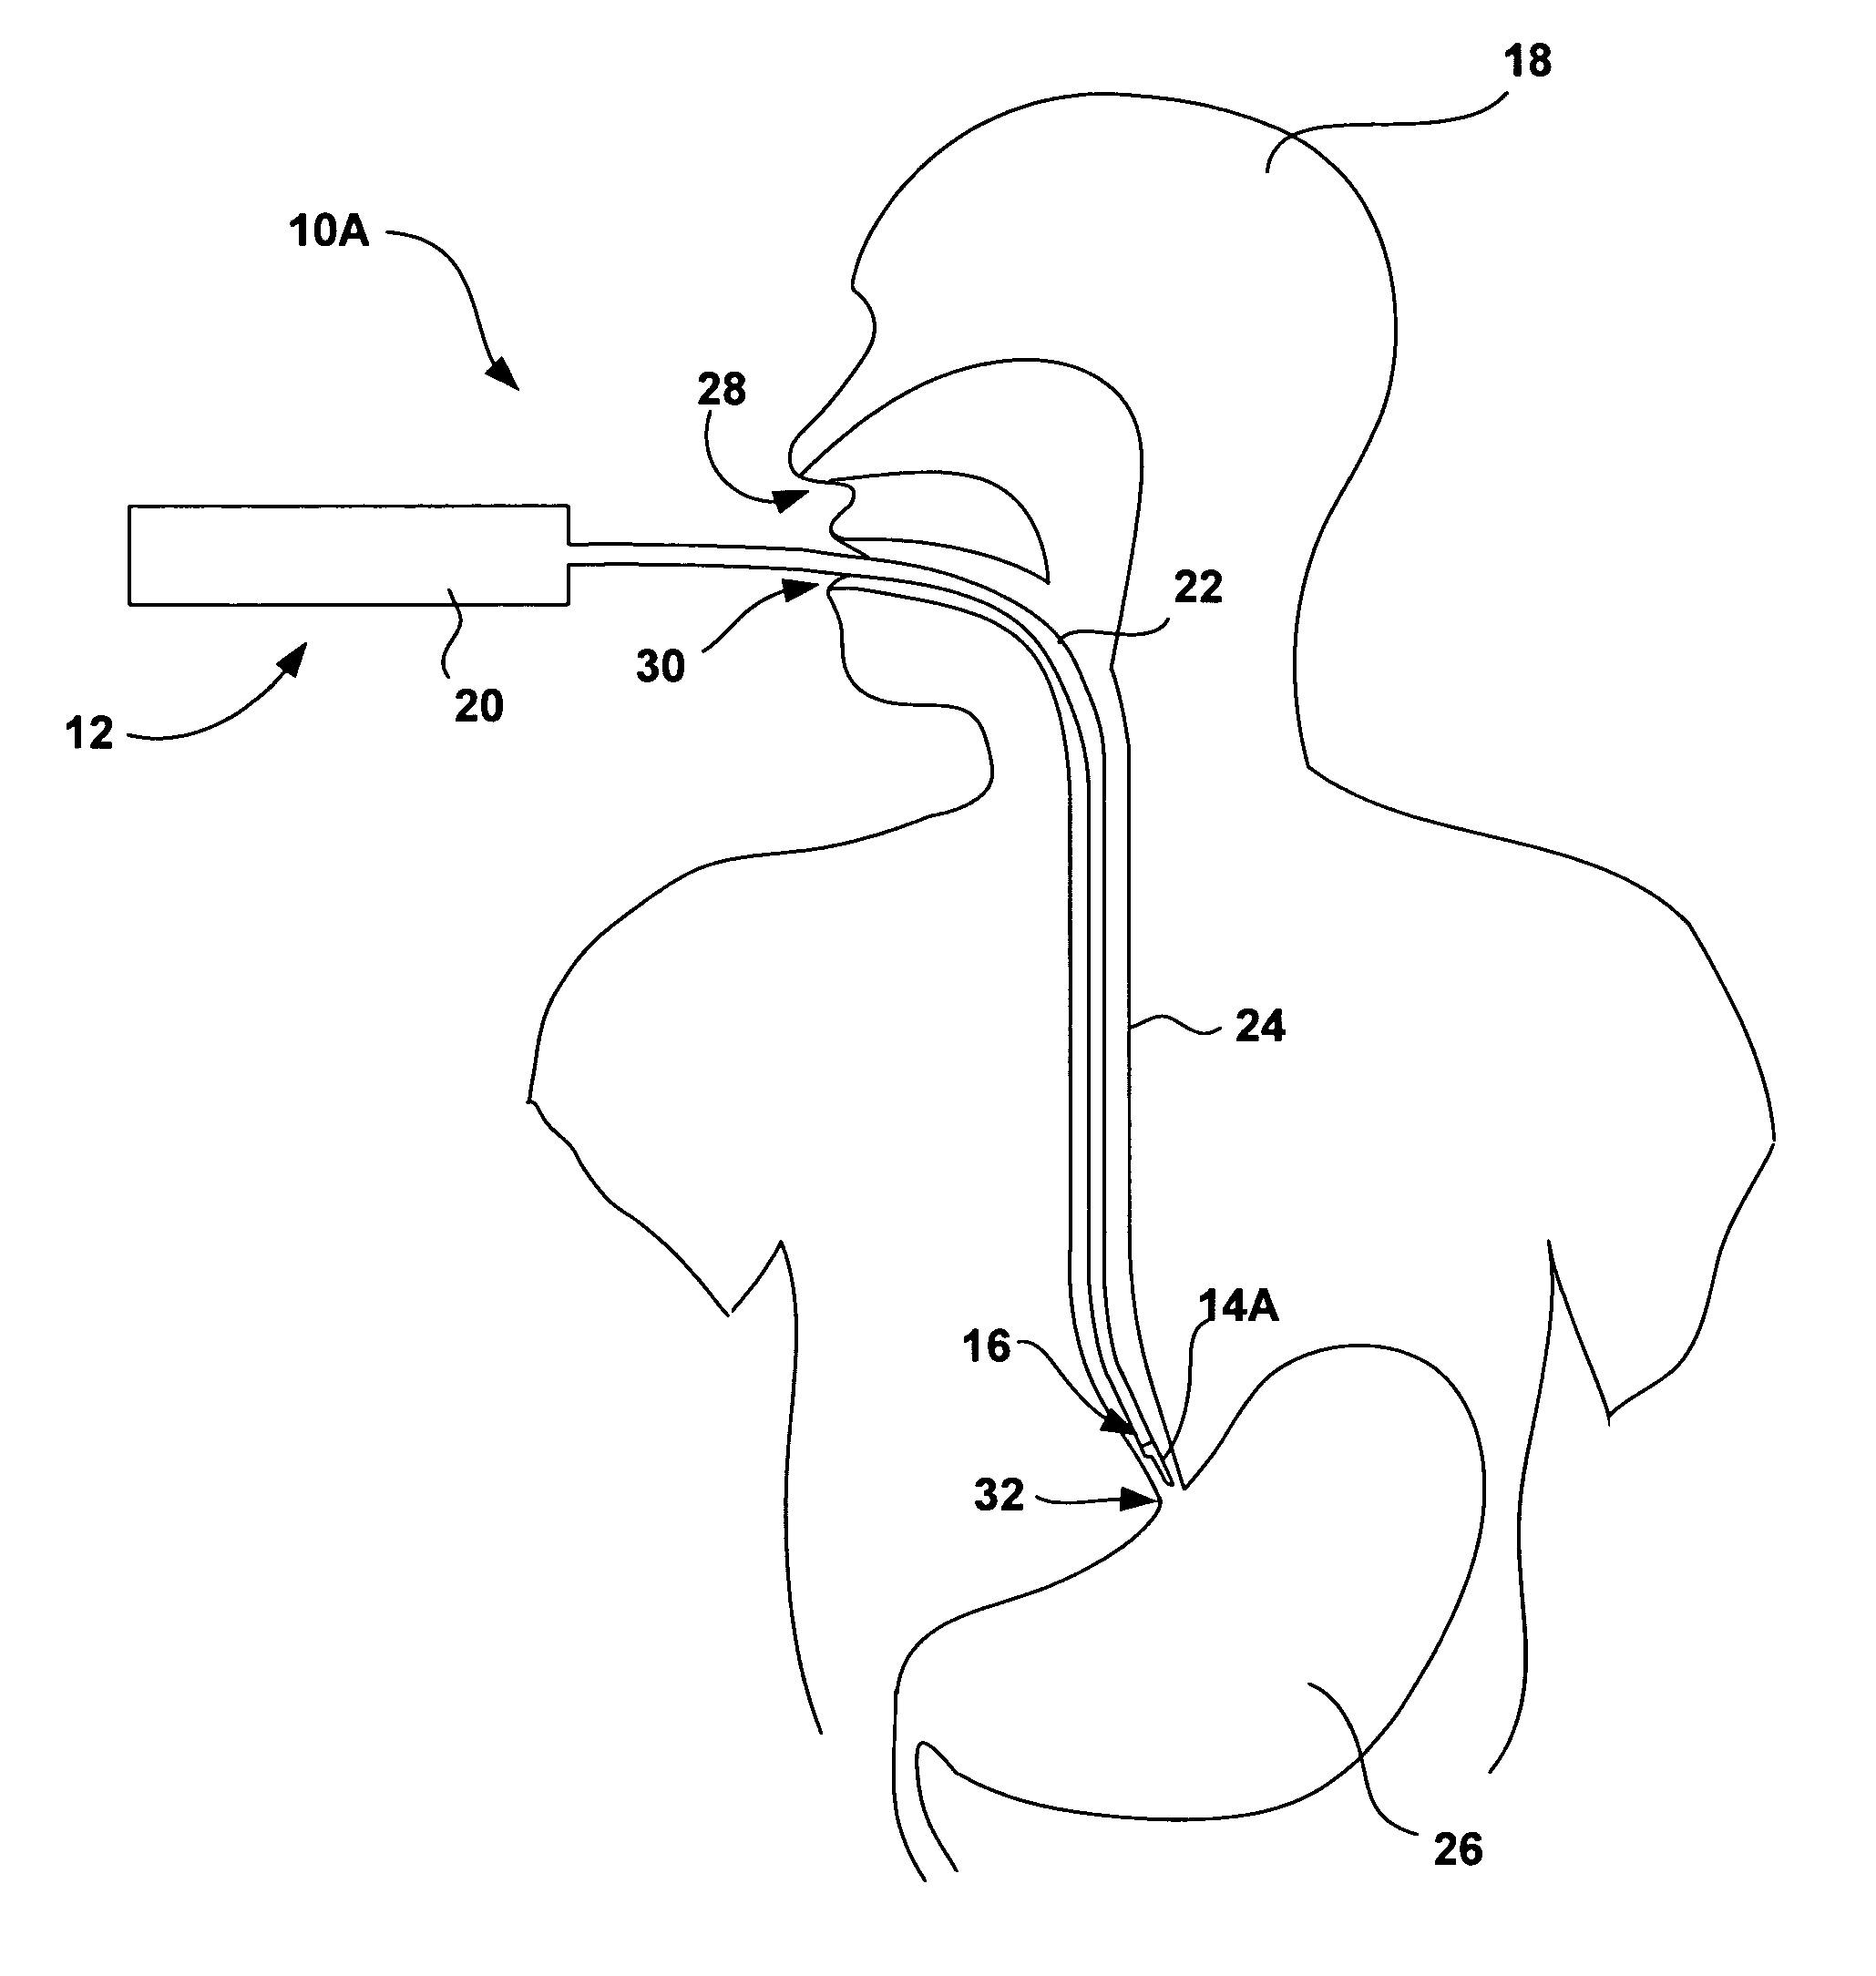 Distal portion of an endoscopic delivery system